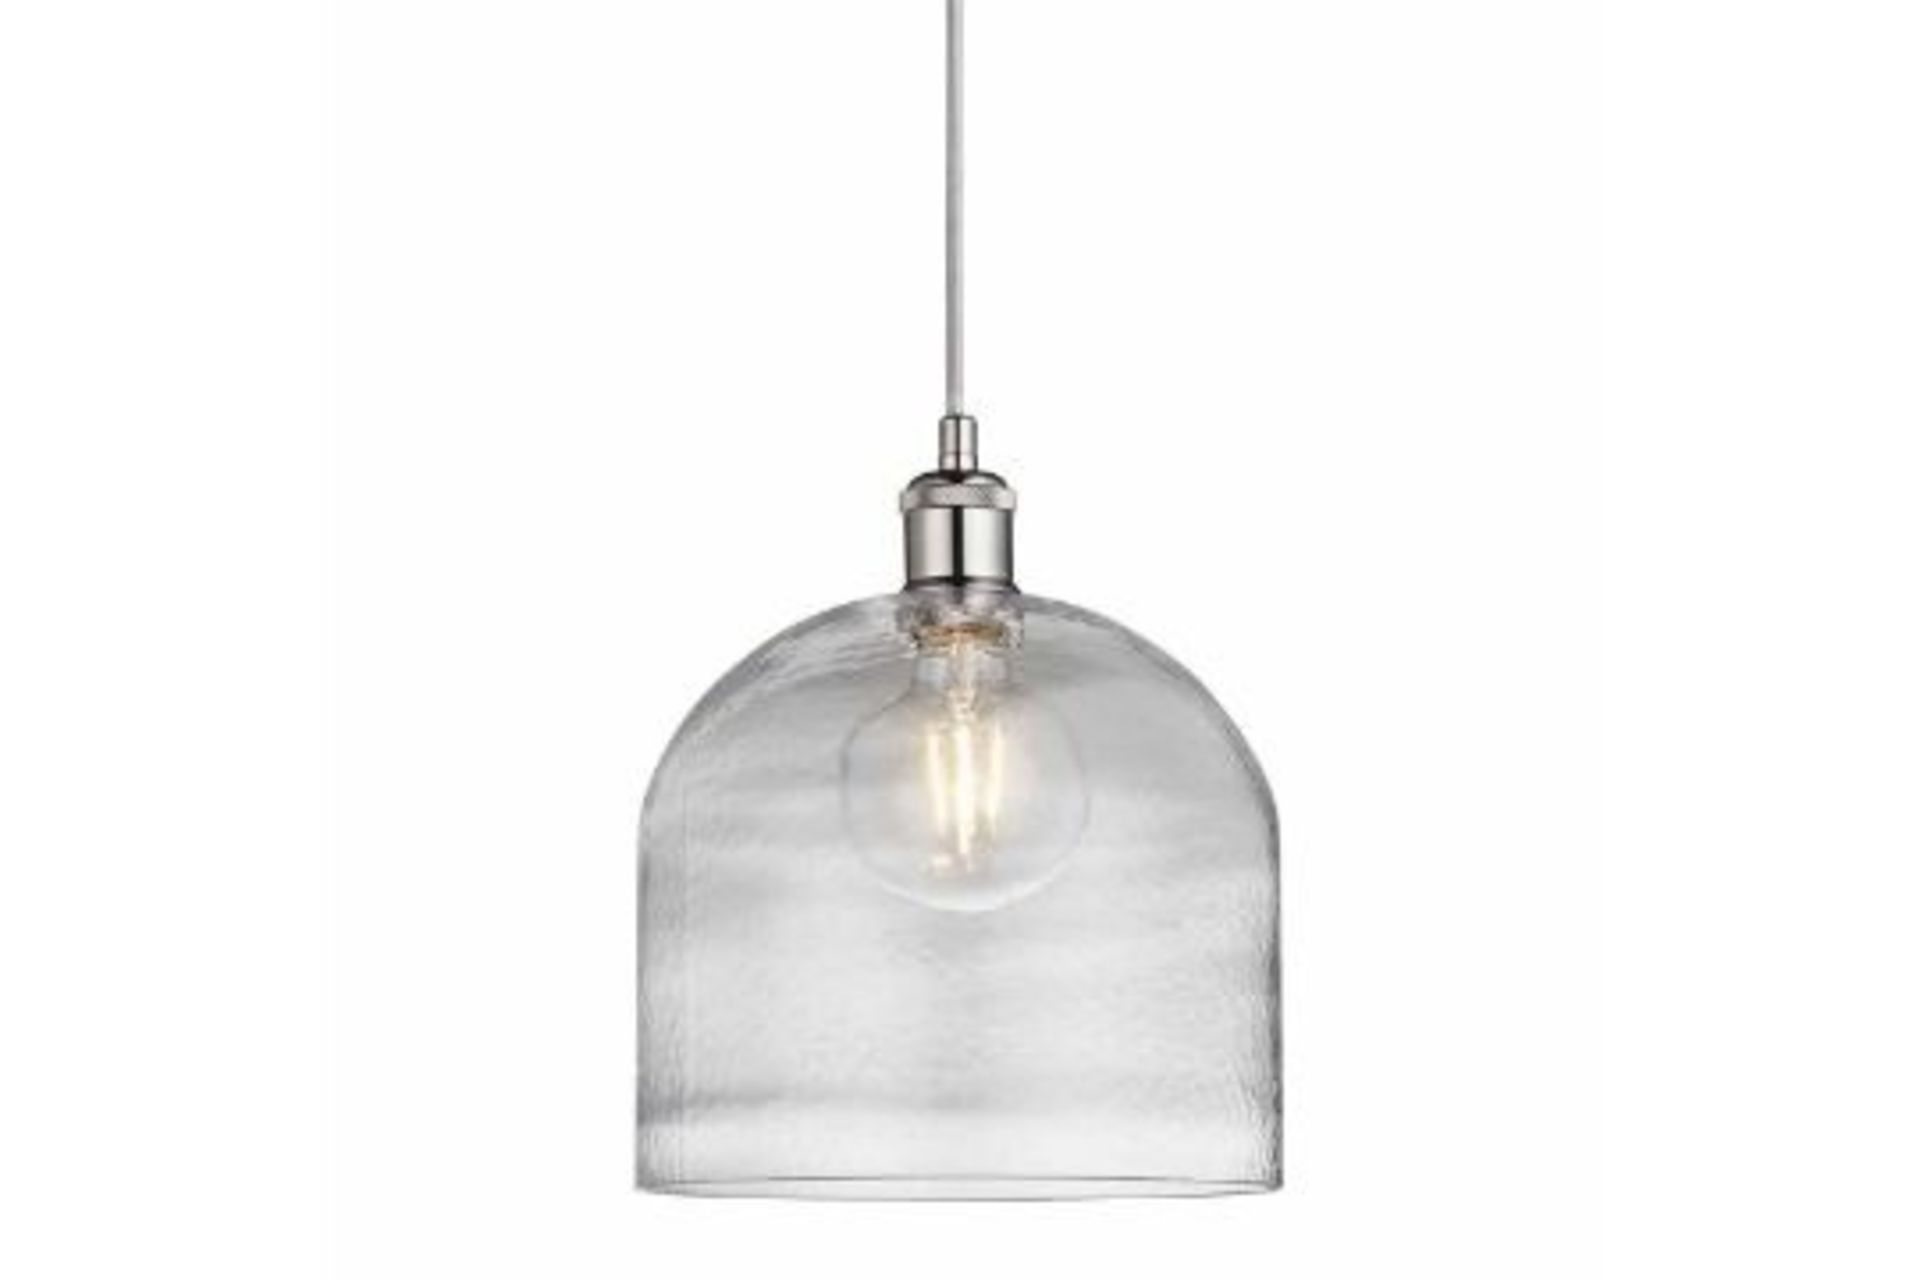 Nielsen Campelli Large Industrial Satin Silver Dome Pendant Light with Clear Glass, Mottled Shade. -